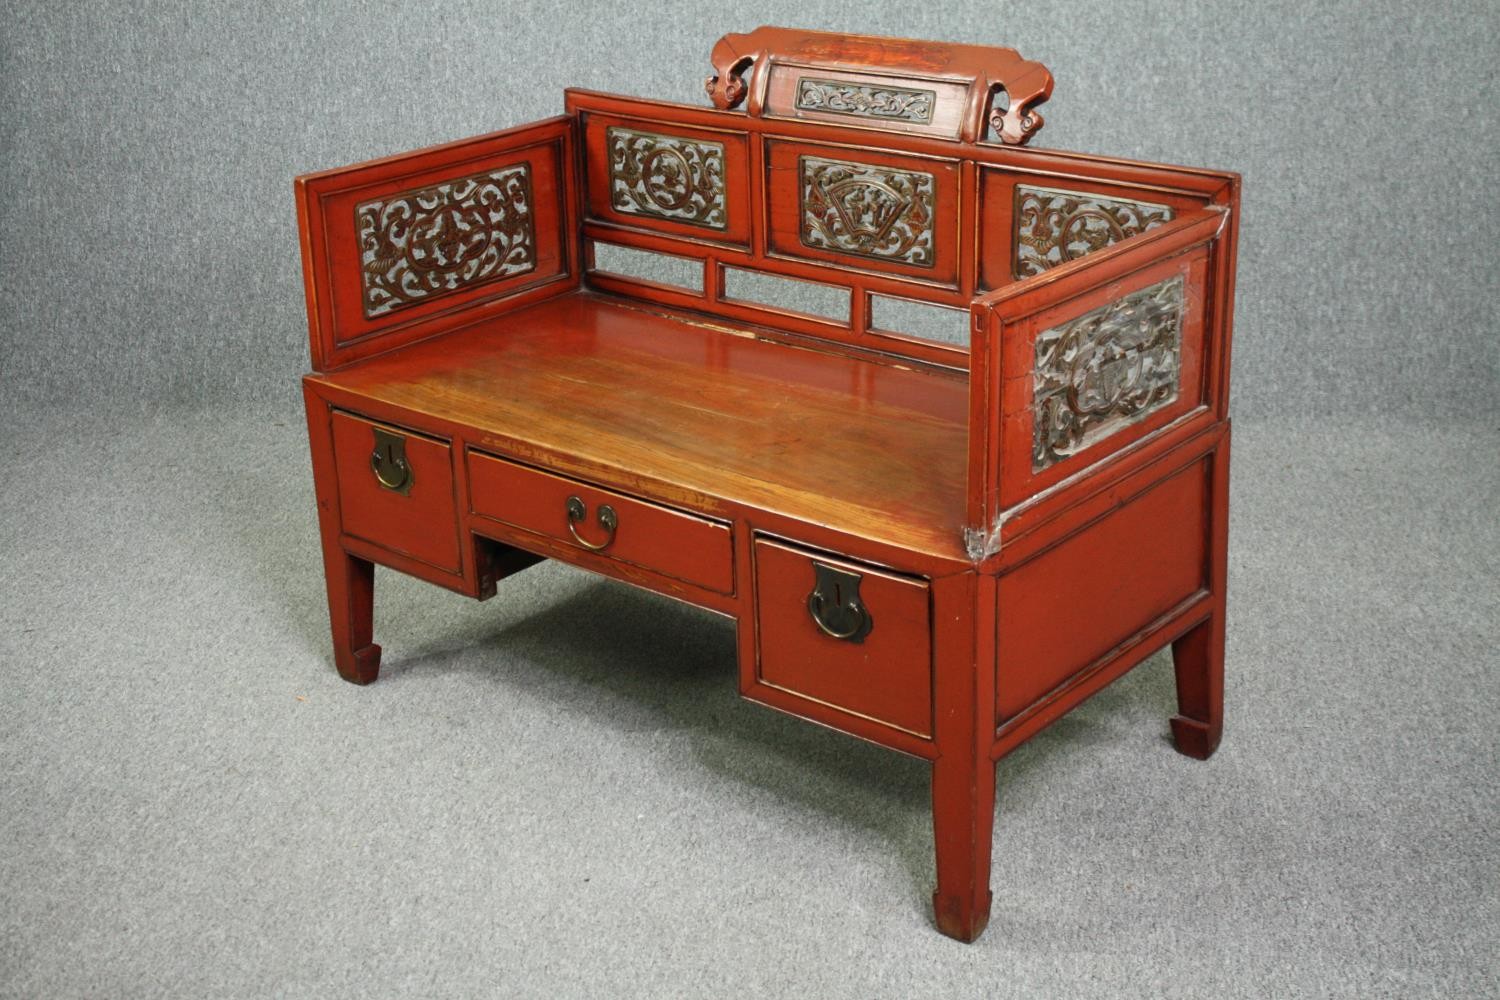 A 19th century Chinese window seat, lacquered polychrome and carved fitted with drawers to the base. - Image 3 of 10